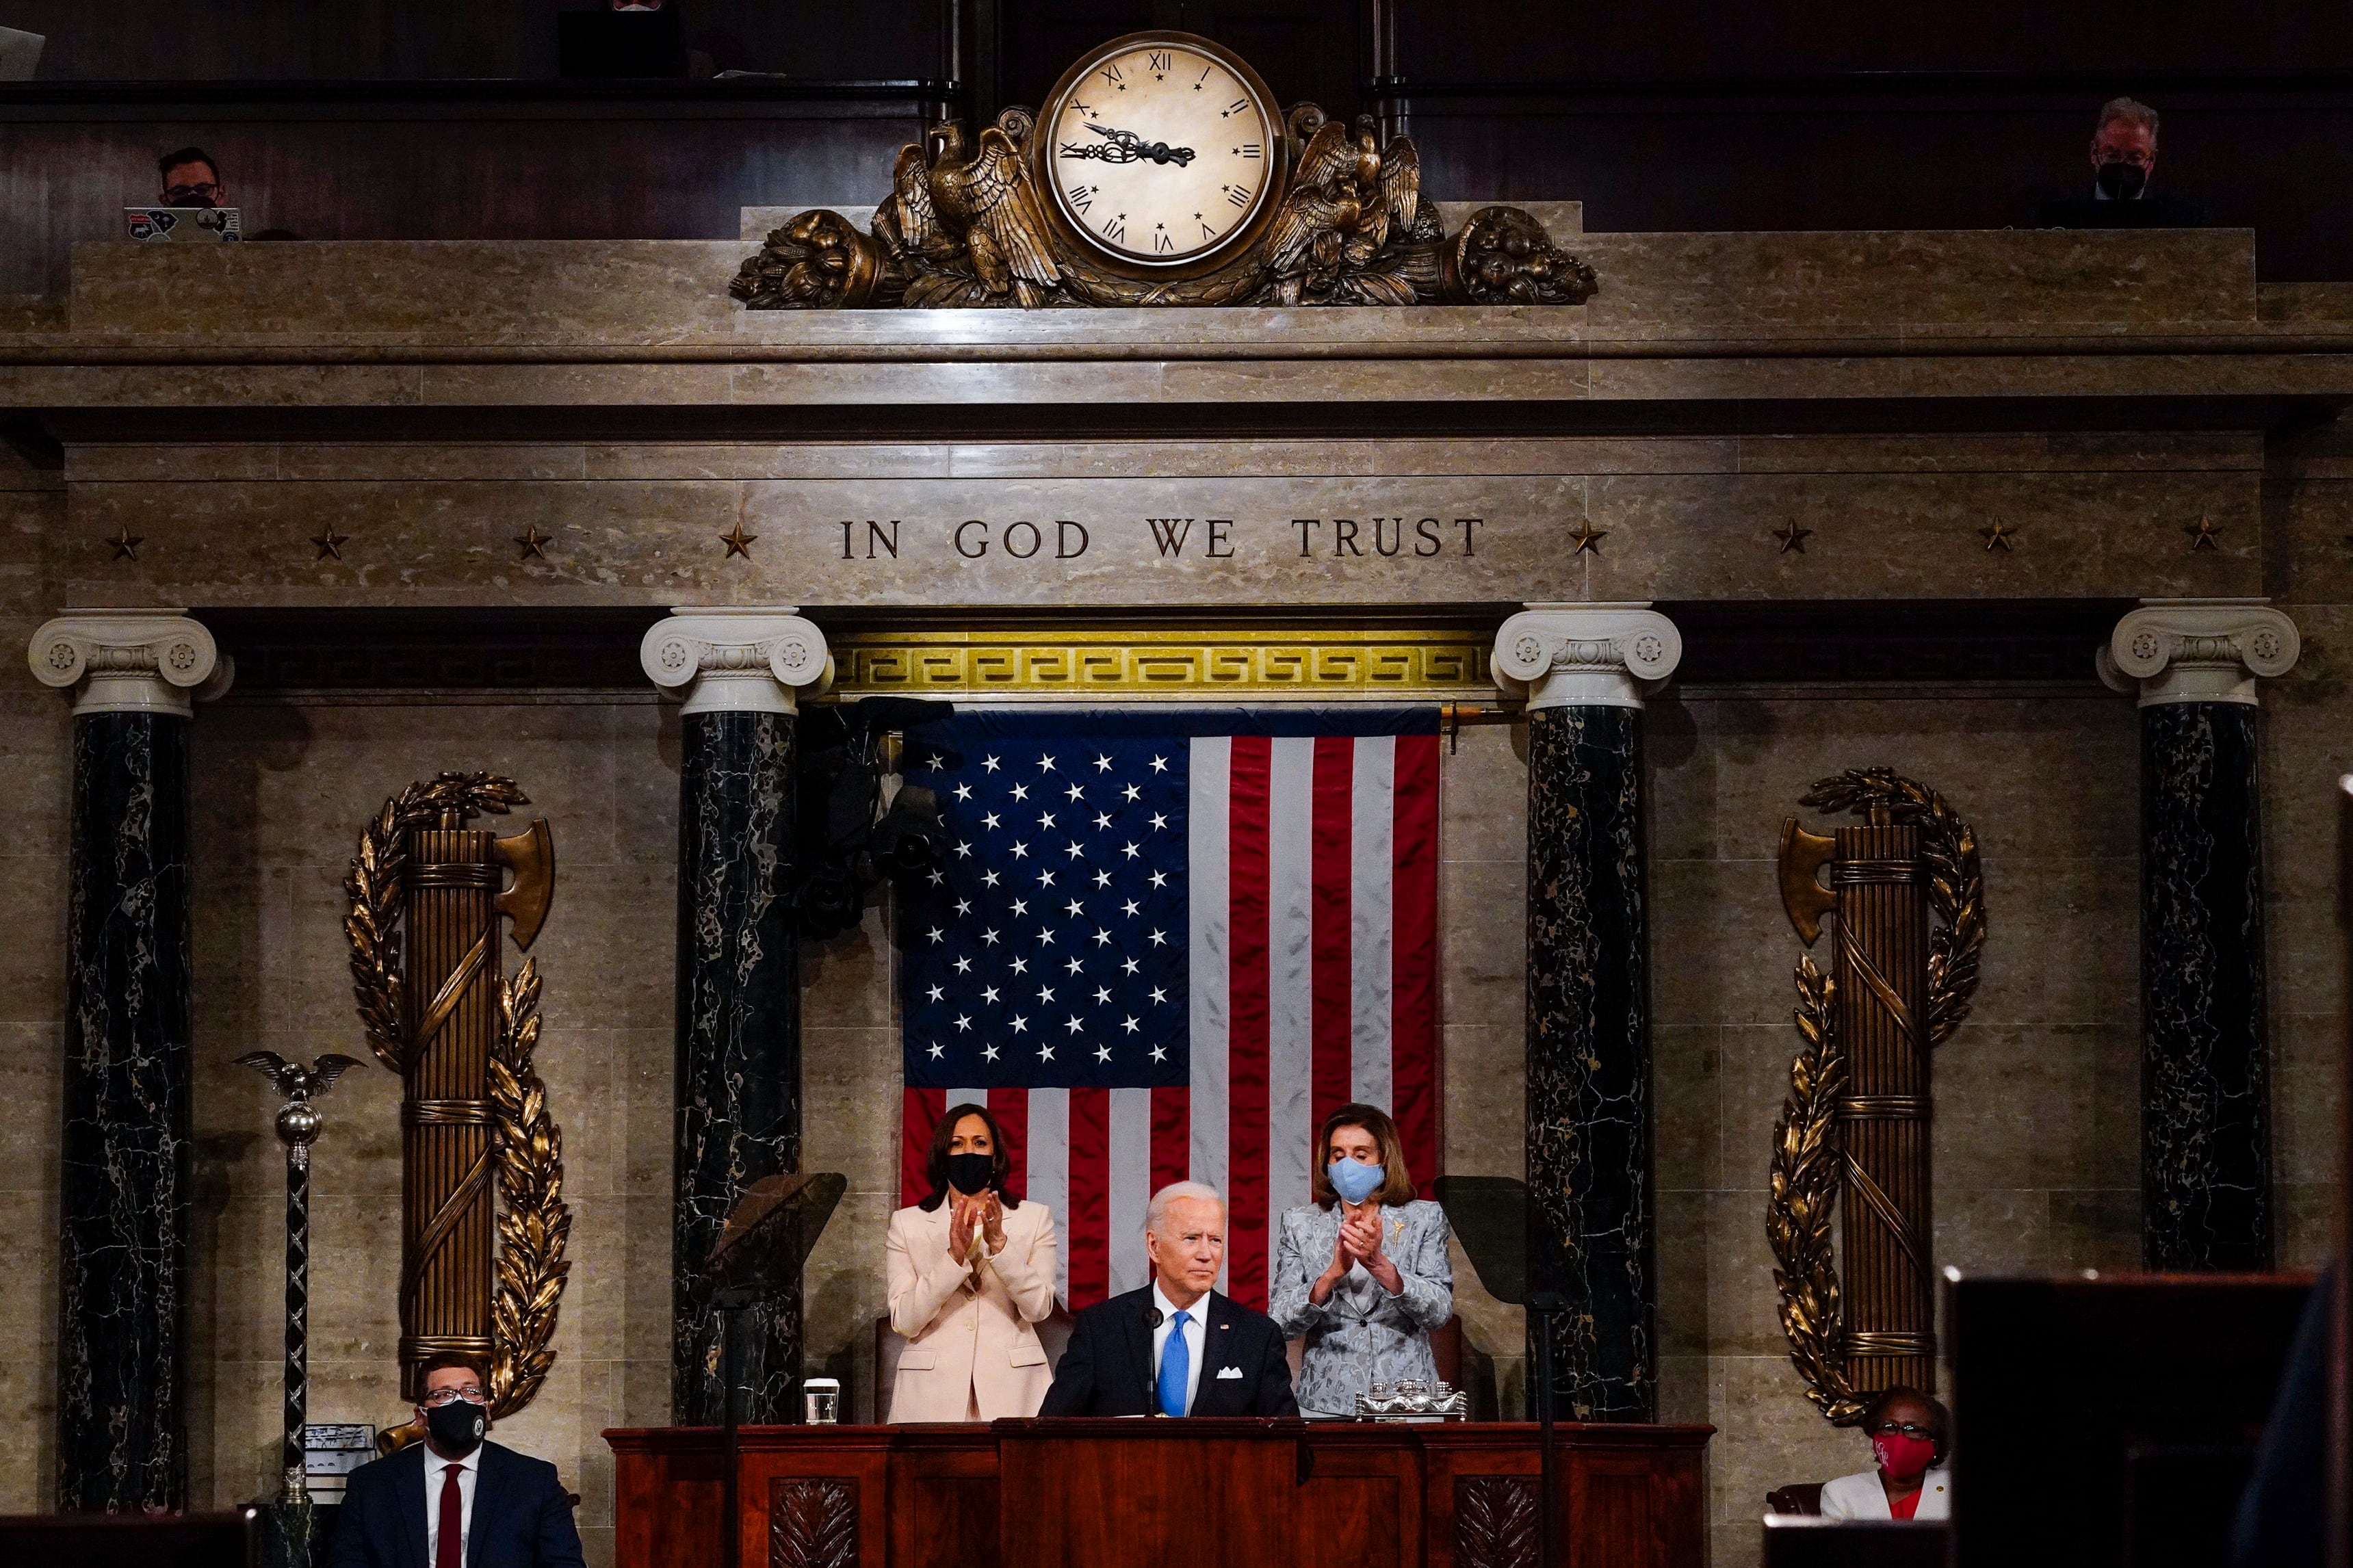 U.S. President Joe Biden addresses a joint session of Congress as Vice President Kamala Harris (L) and Speaker of the House U.S. Rep. Nancy Pelosi (D-CA) (R) look on in the House chamber of the U.S. Capitol April 28, 2021 in Washington, DC.